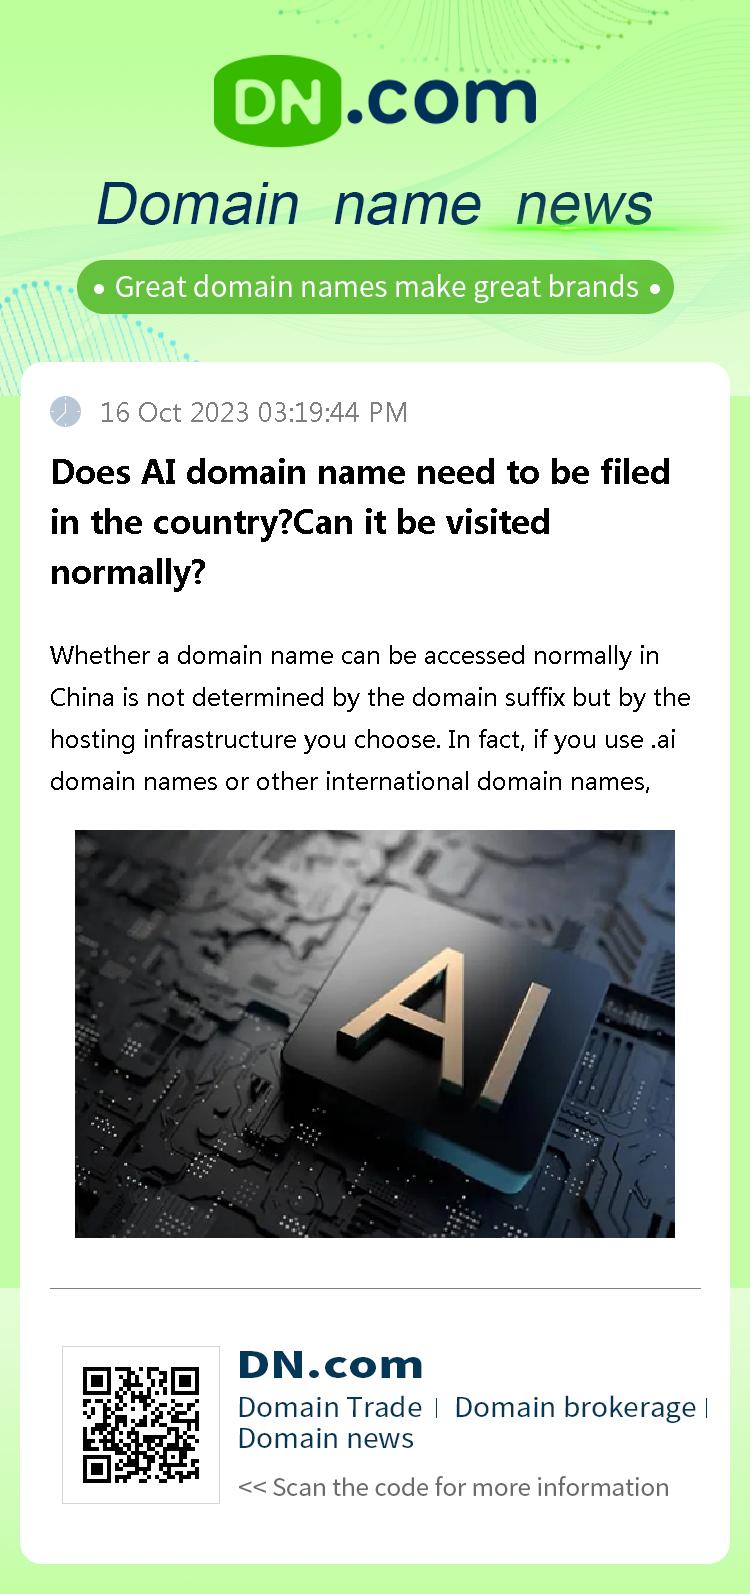 Does AI domain name need to be filed in the country?Can it be visited normally?